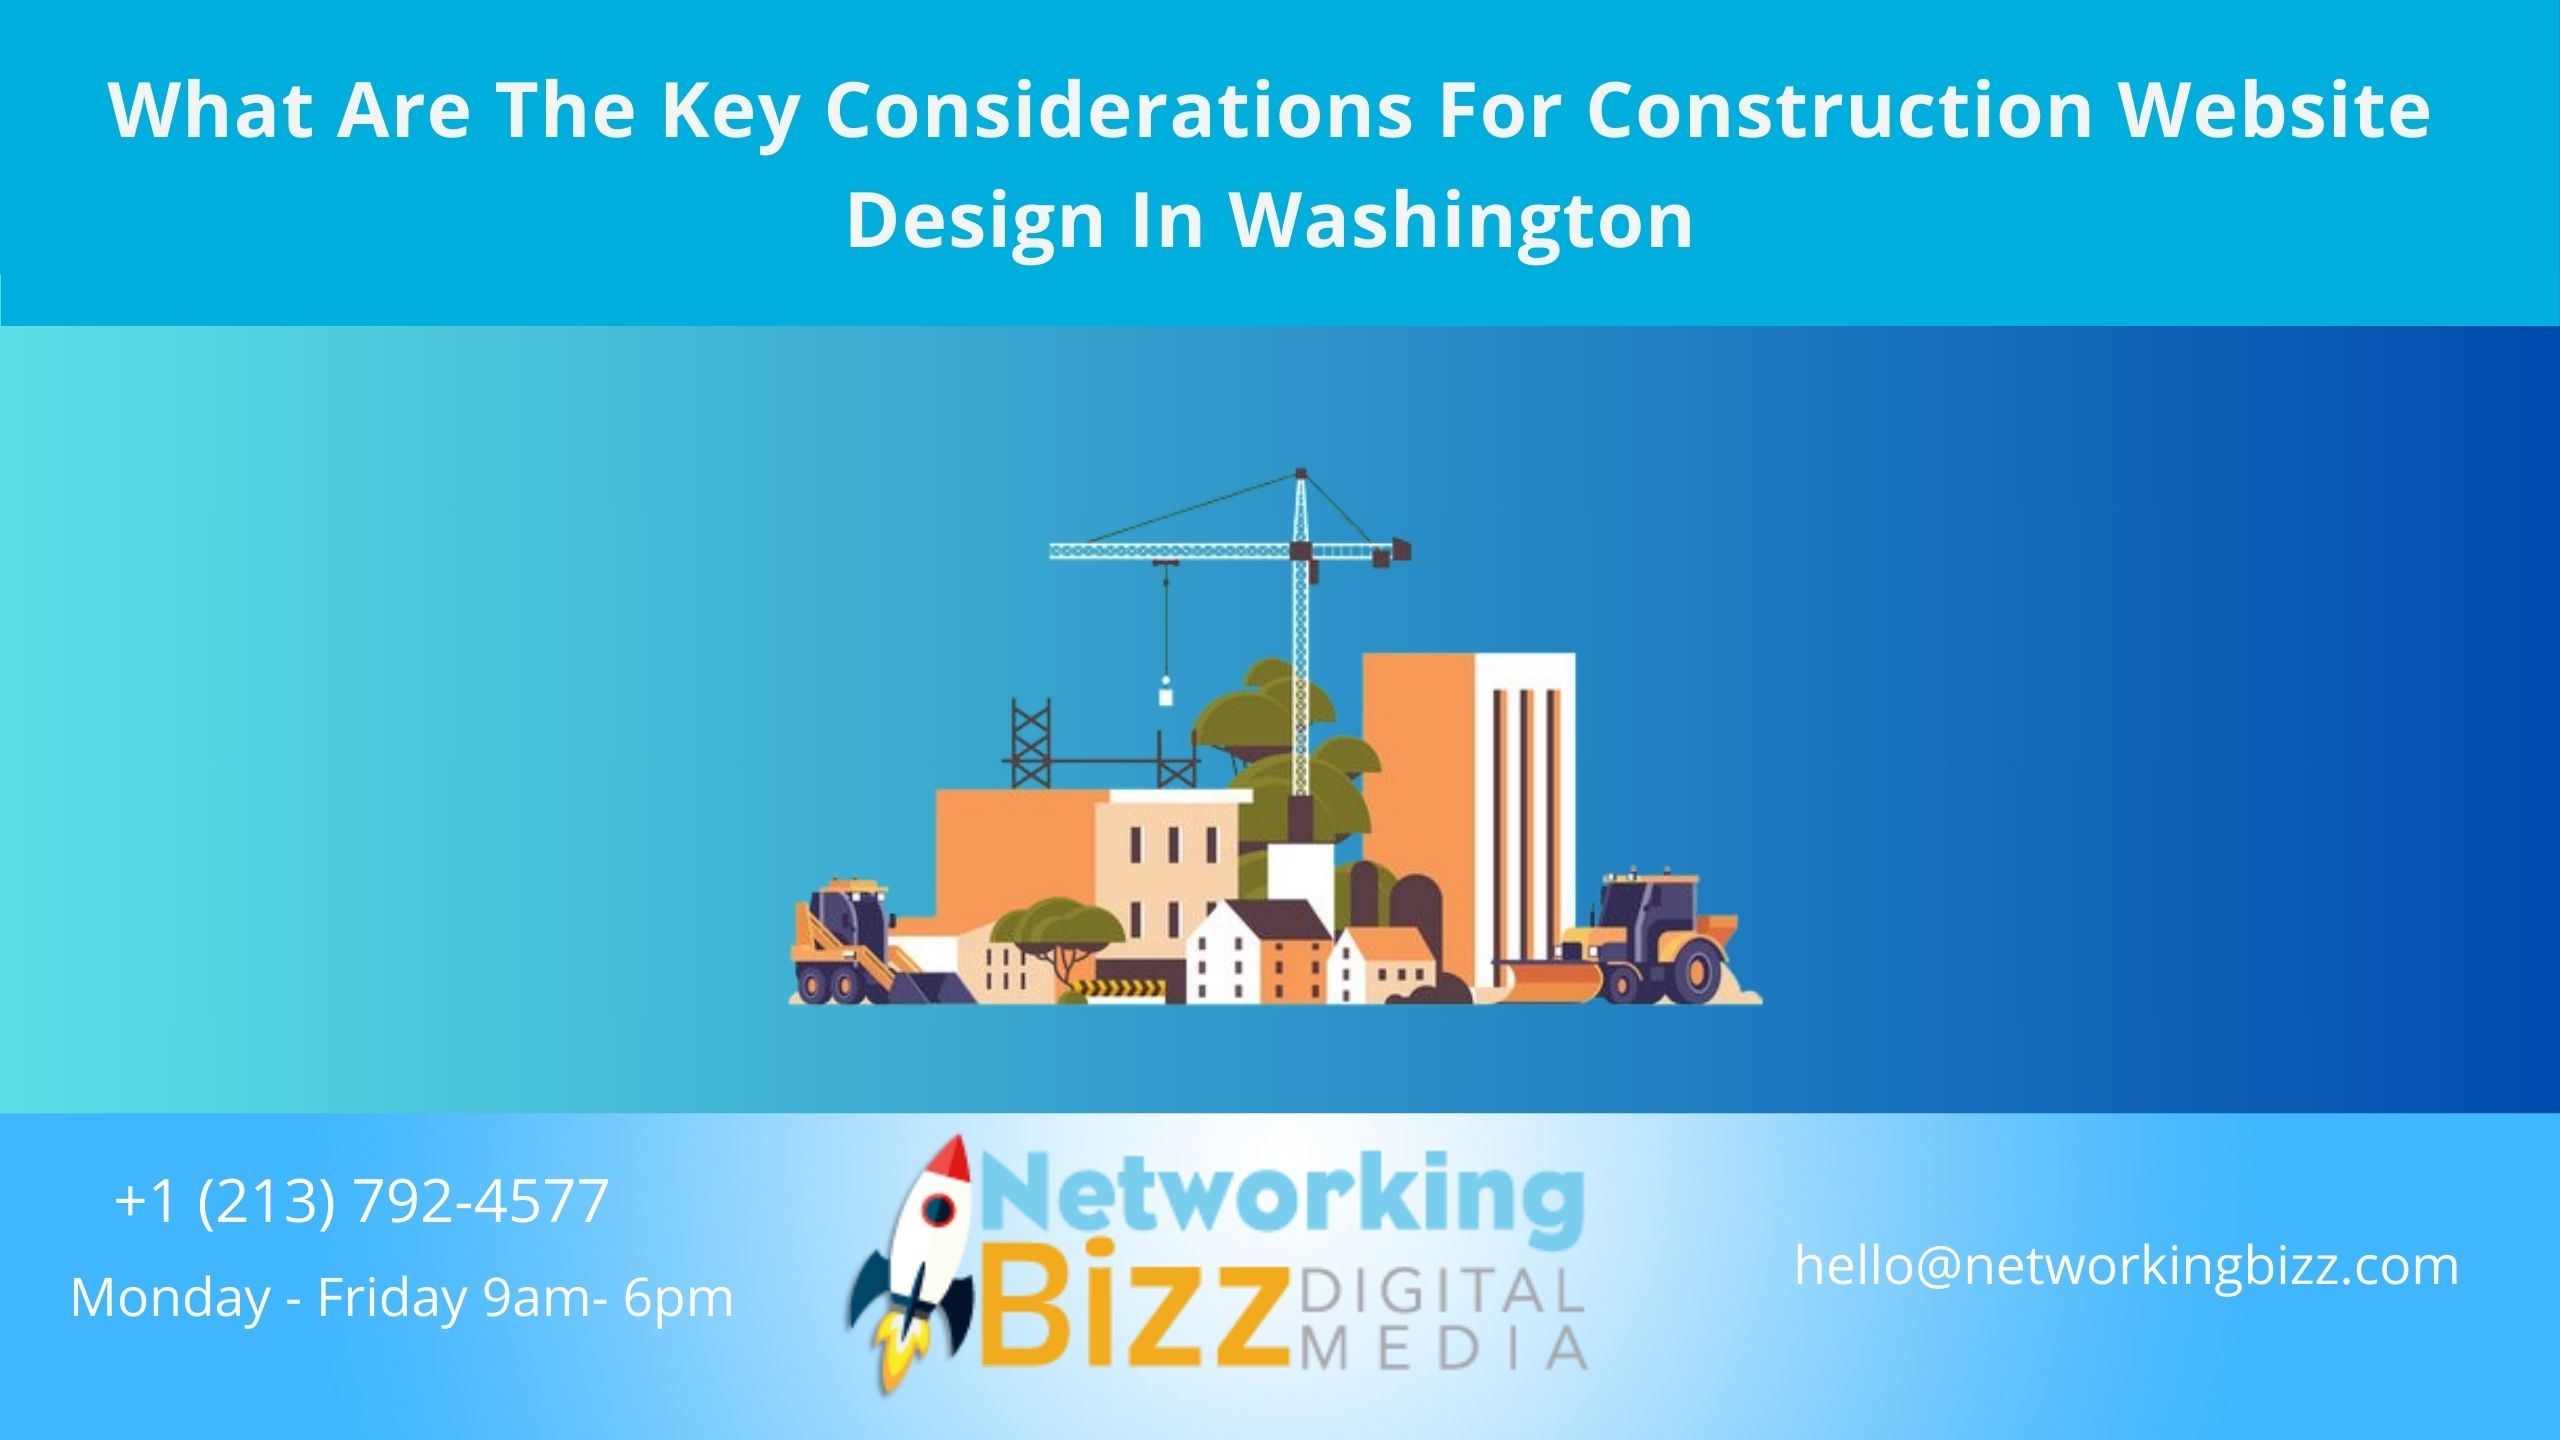 What Are The Key Considerations For Construction Website Design In Washington 